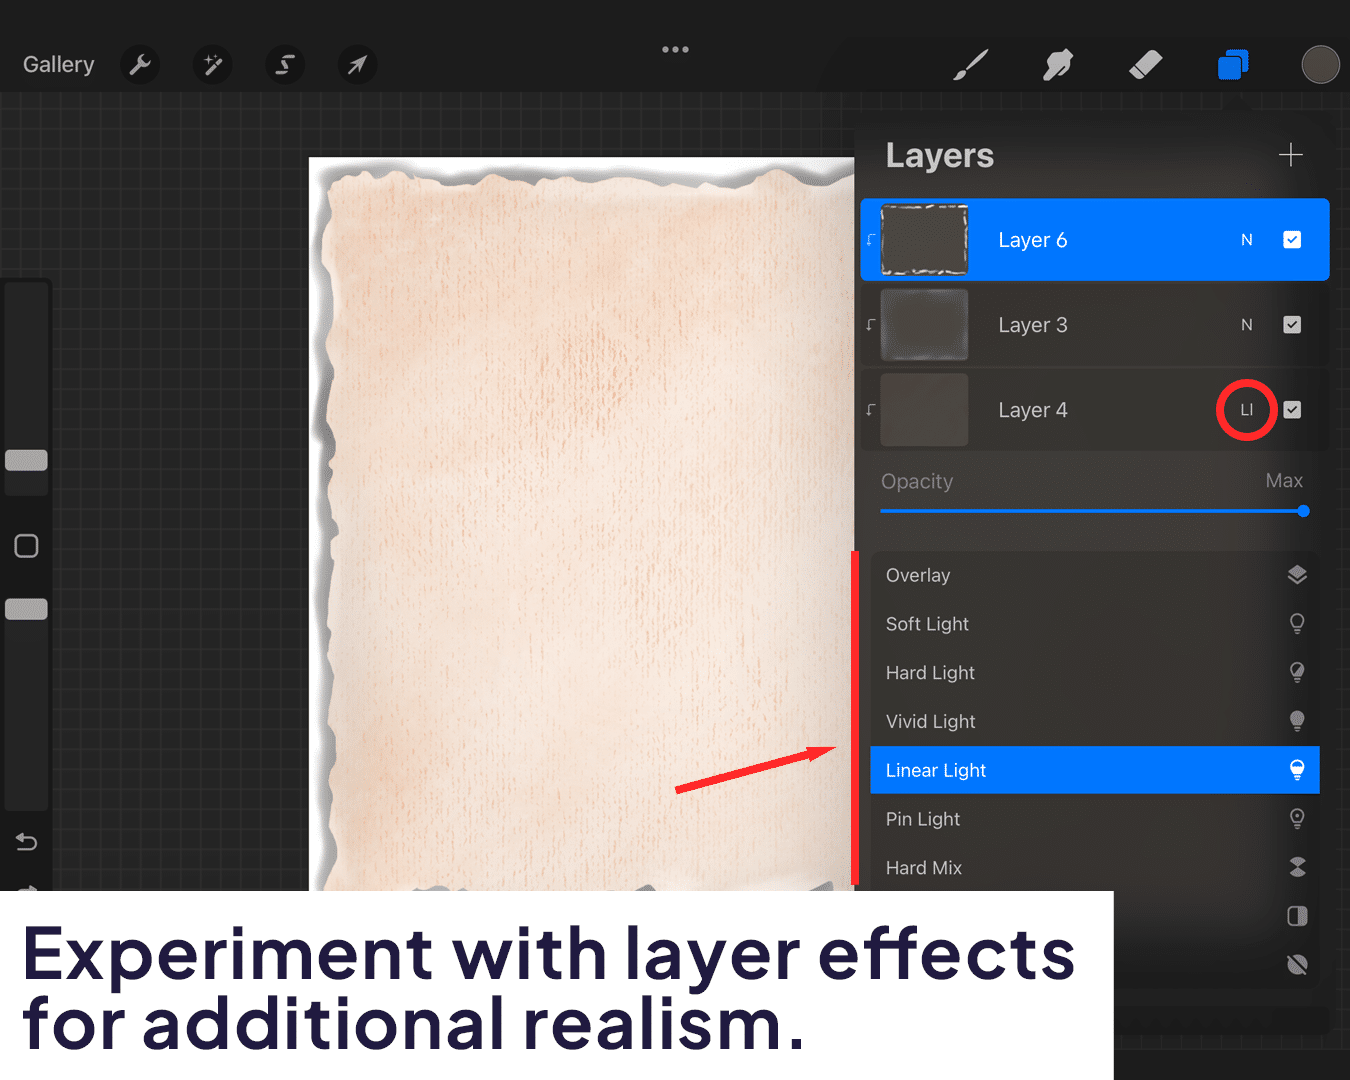 Use different layer effects